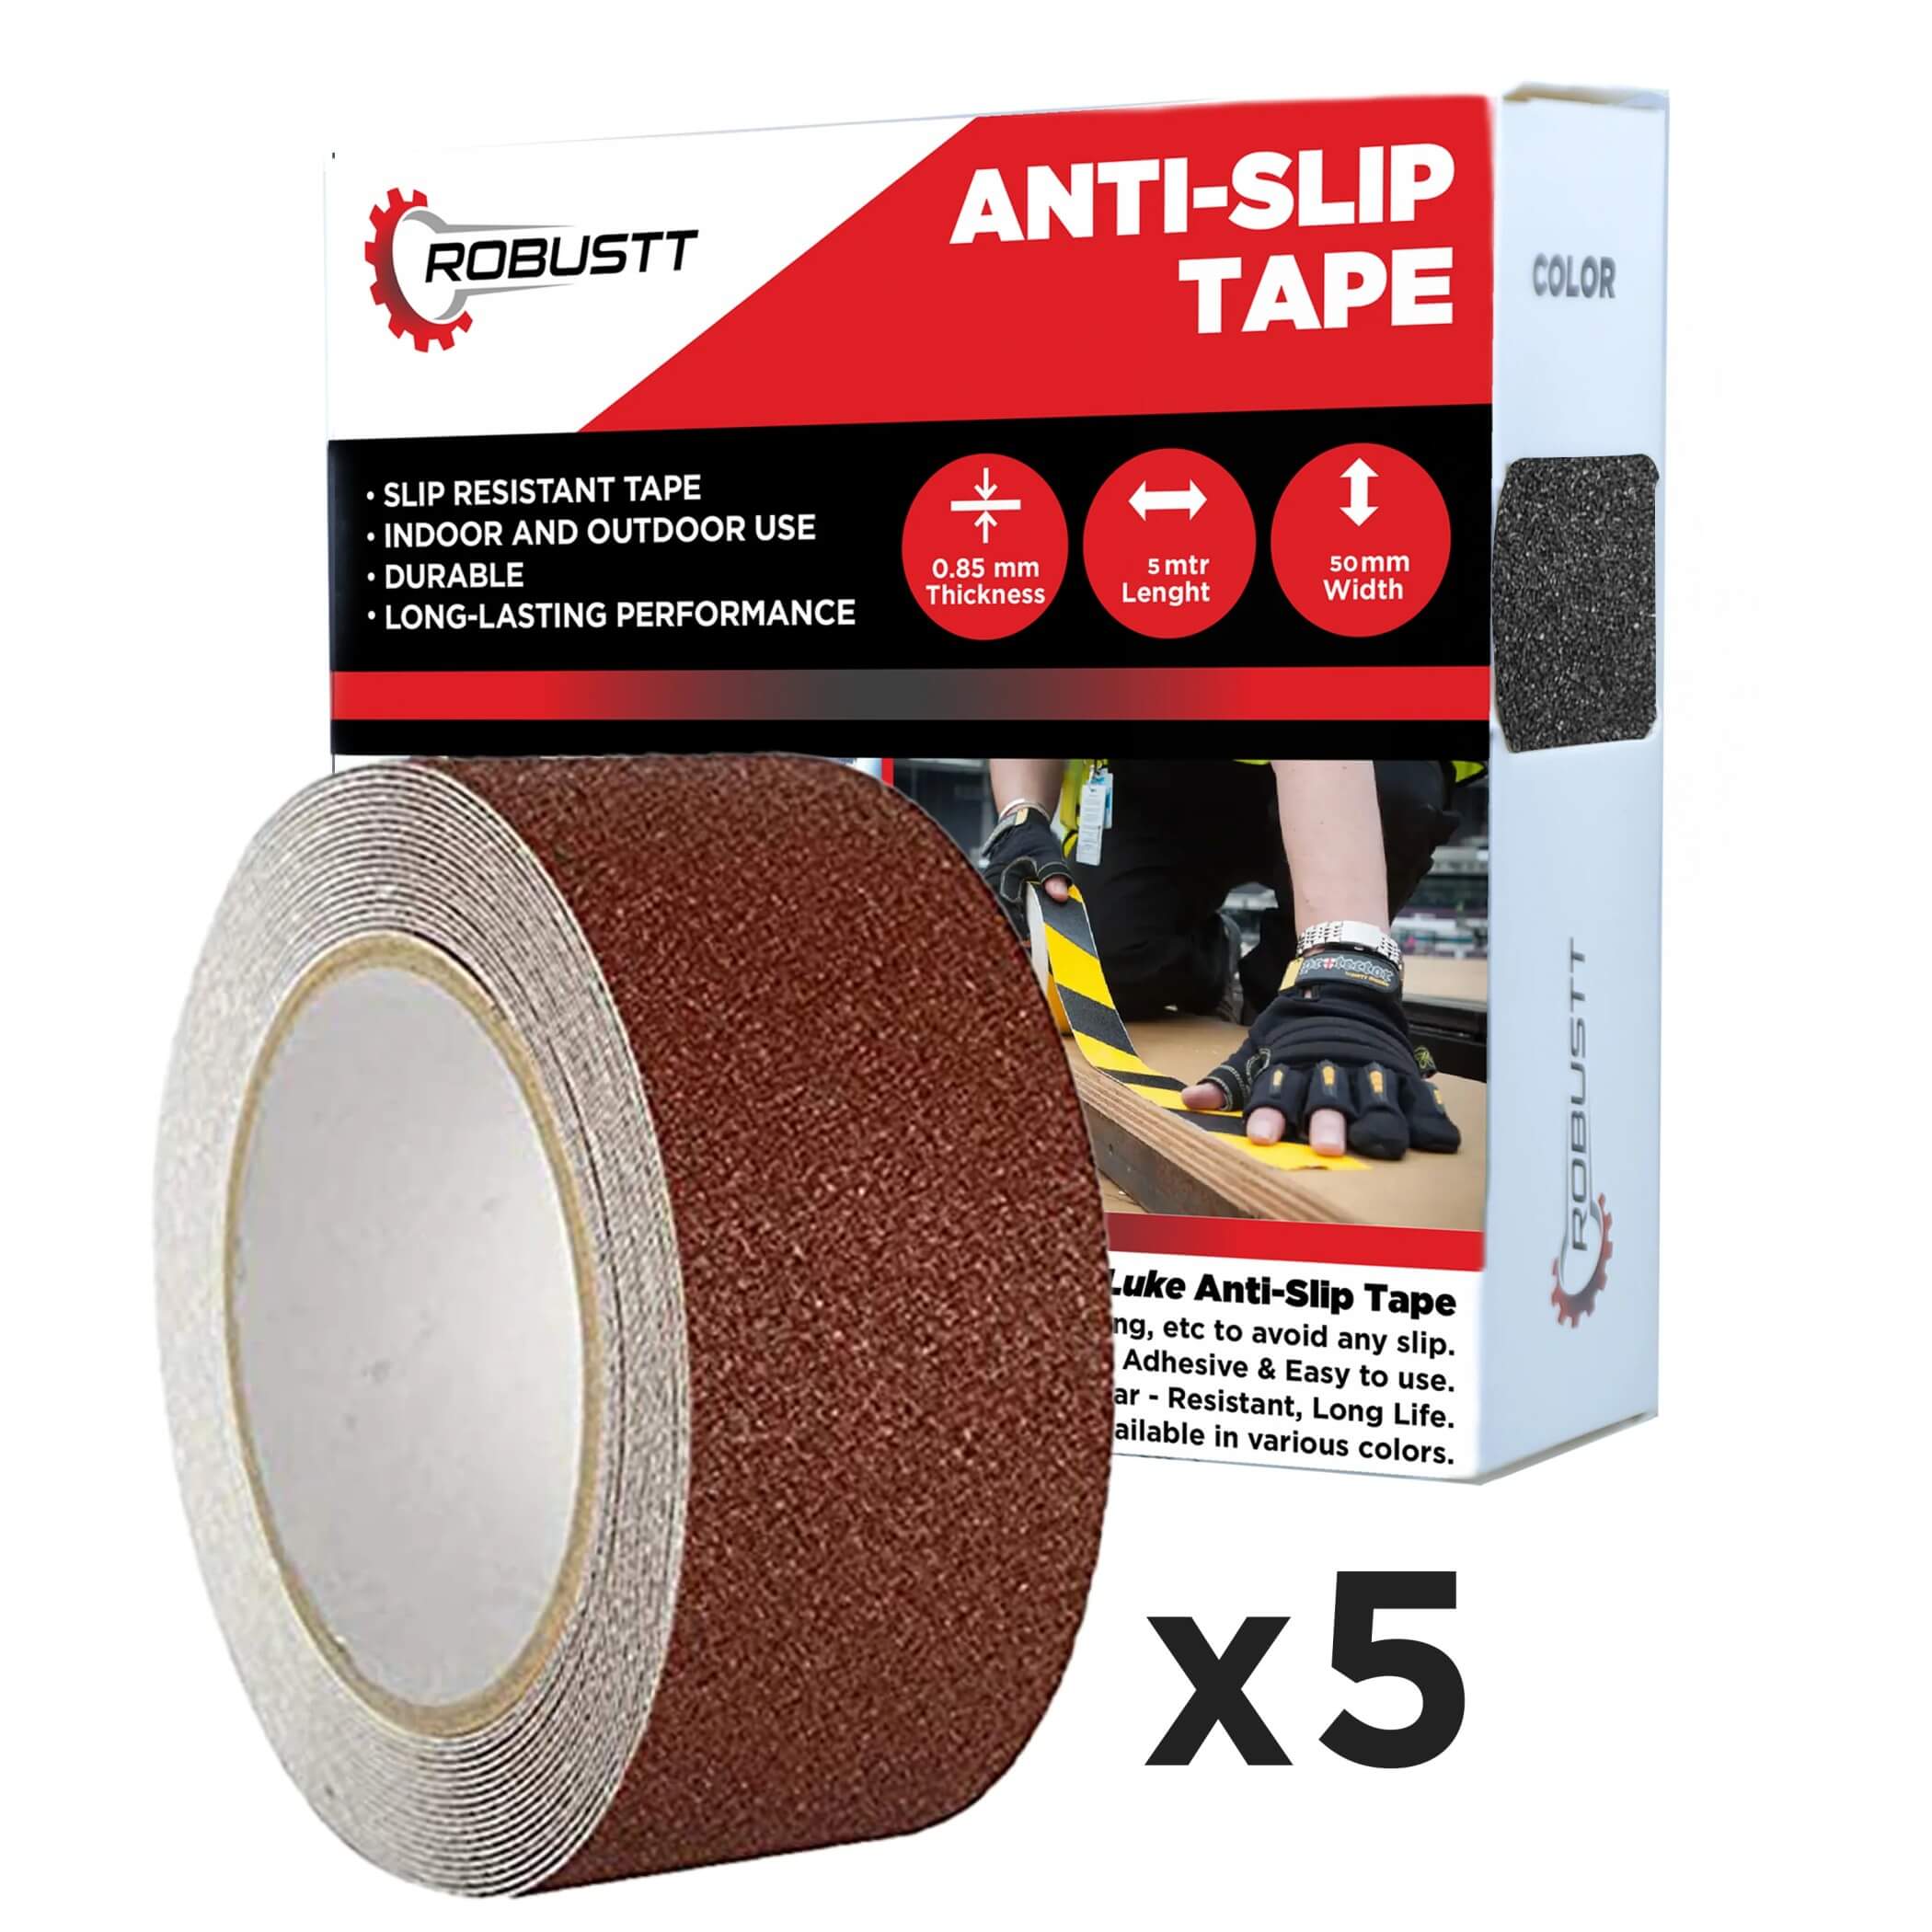 robustt-anti-skid-antislip-5mtr-guaranteed-x50mm-brown-fall-resistant-with-pet-material-and-solvent-acrylic-adhesive-tape-pack-of-5